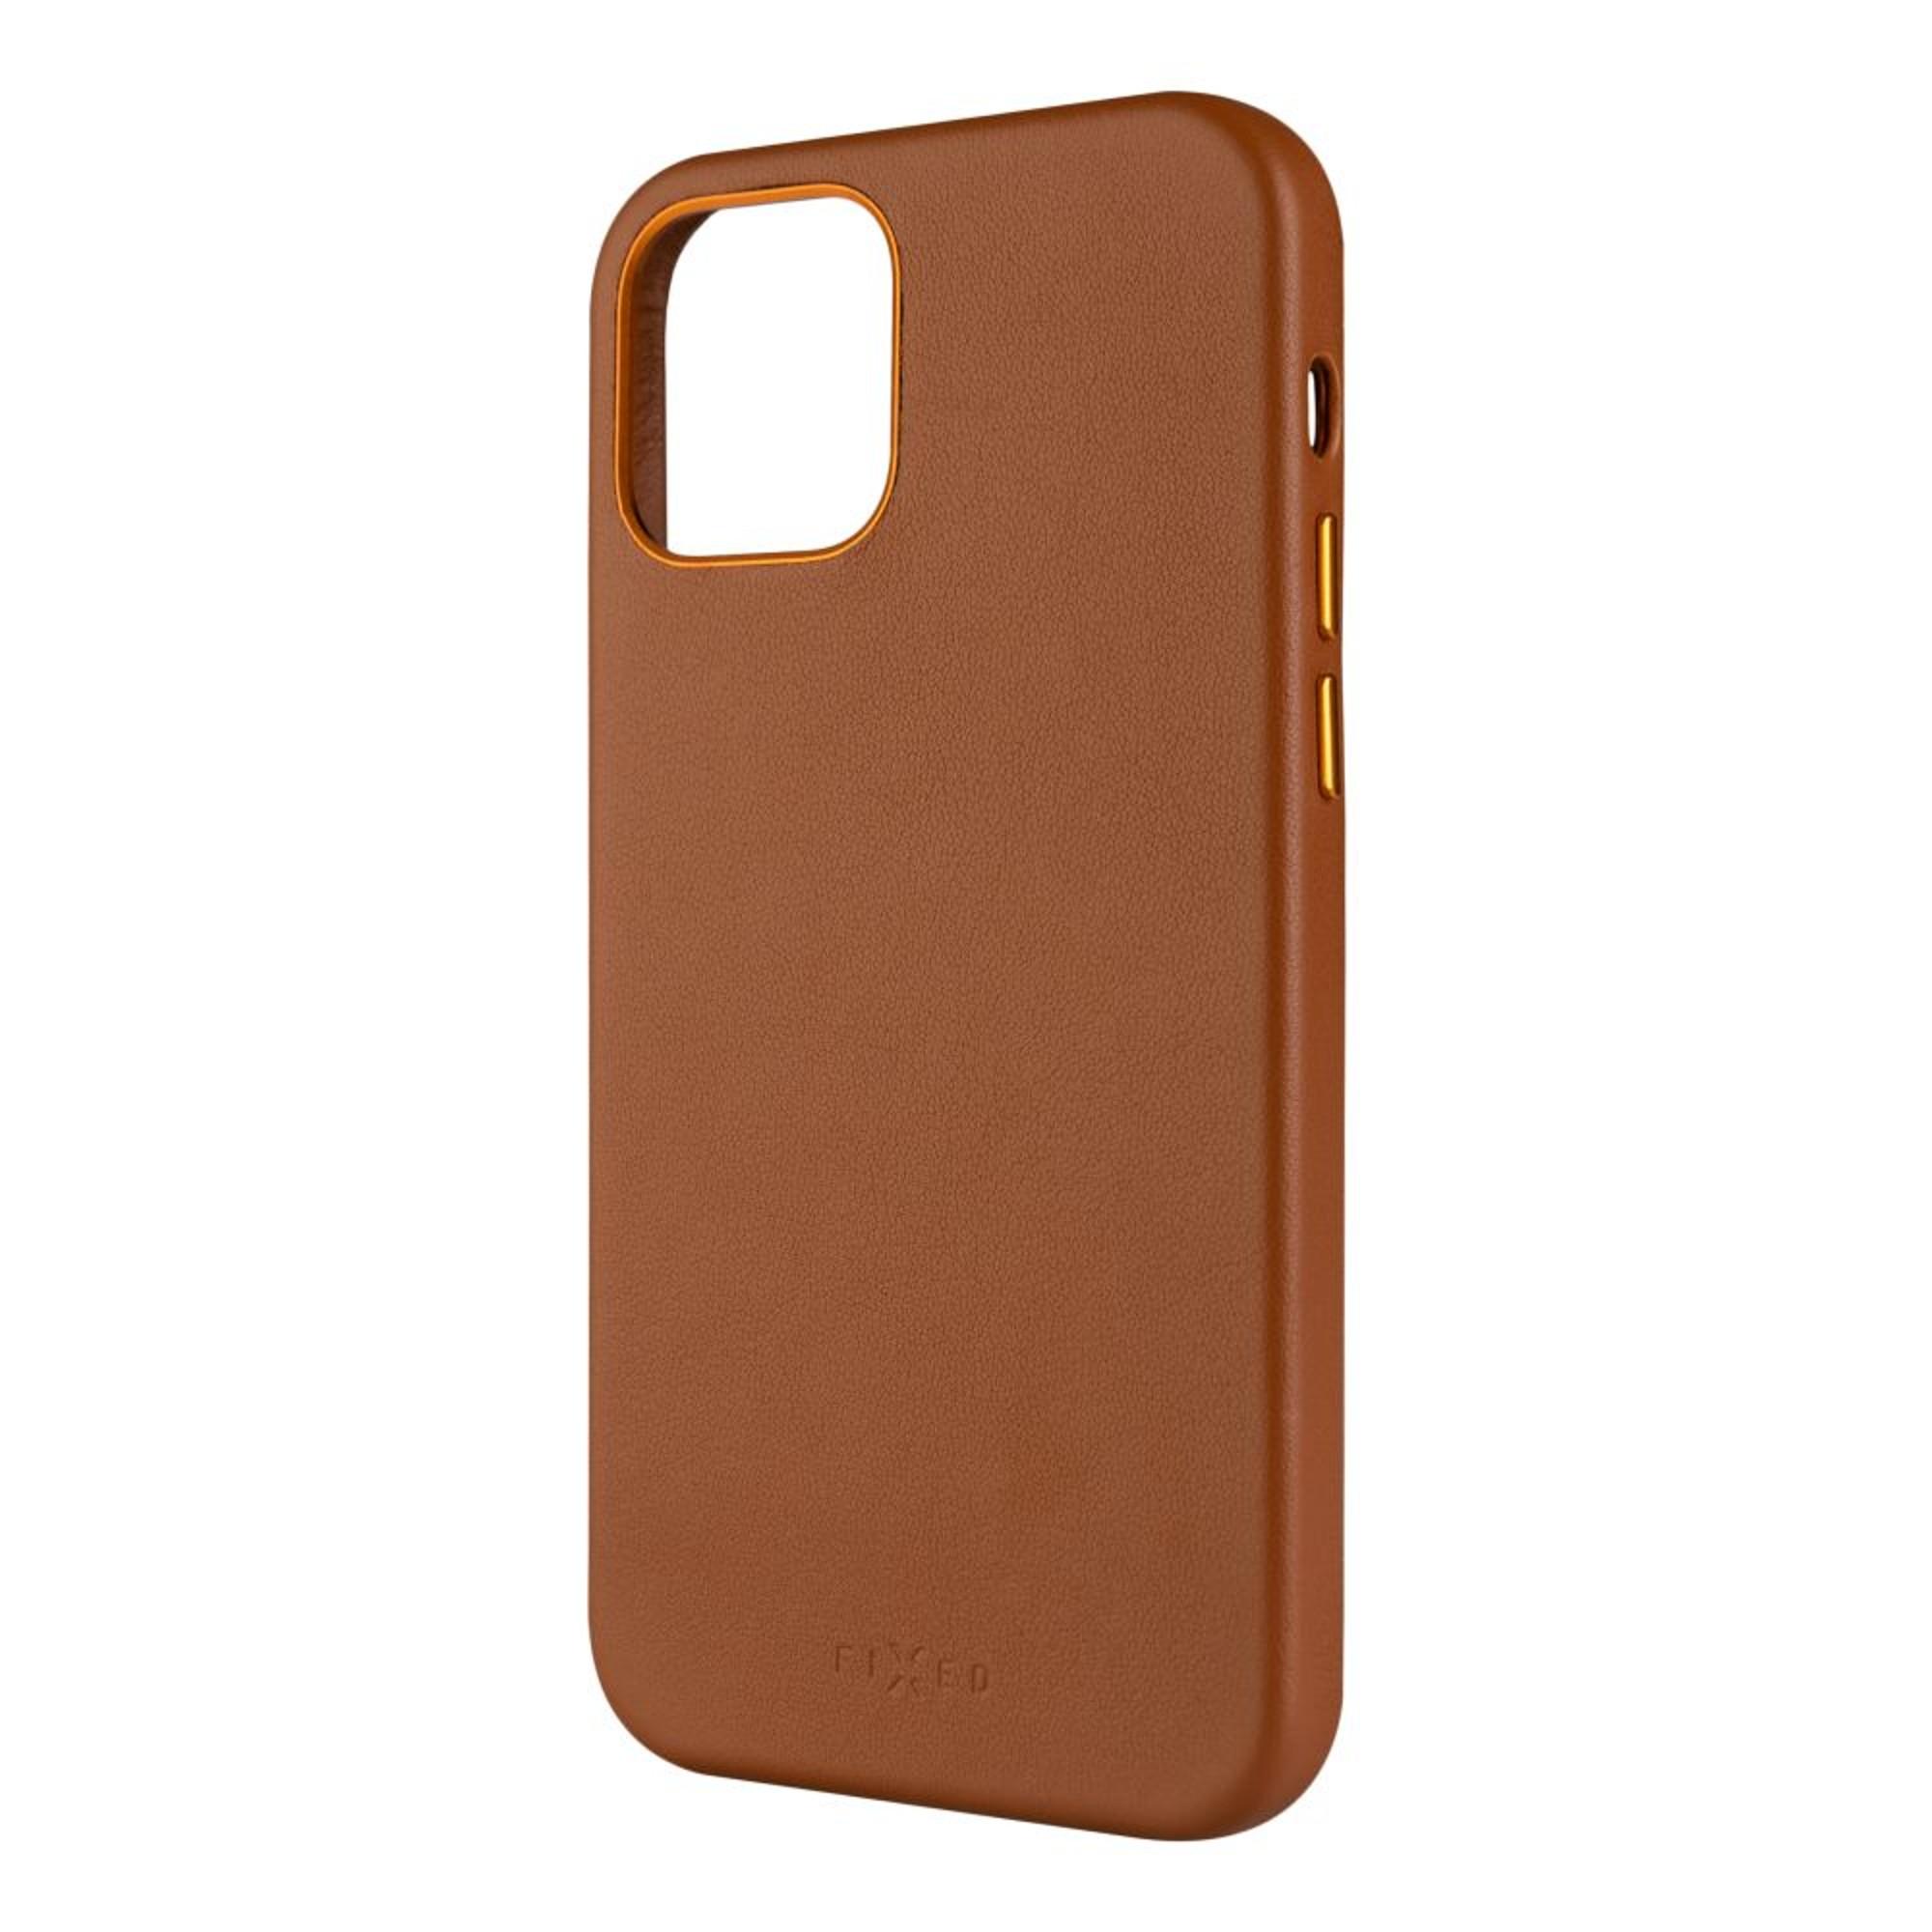 FIXED FIXLM-928-BRW, Braun Apple, 14, Backcover, iPhone